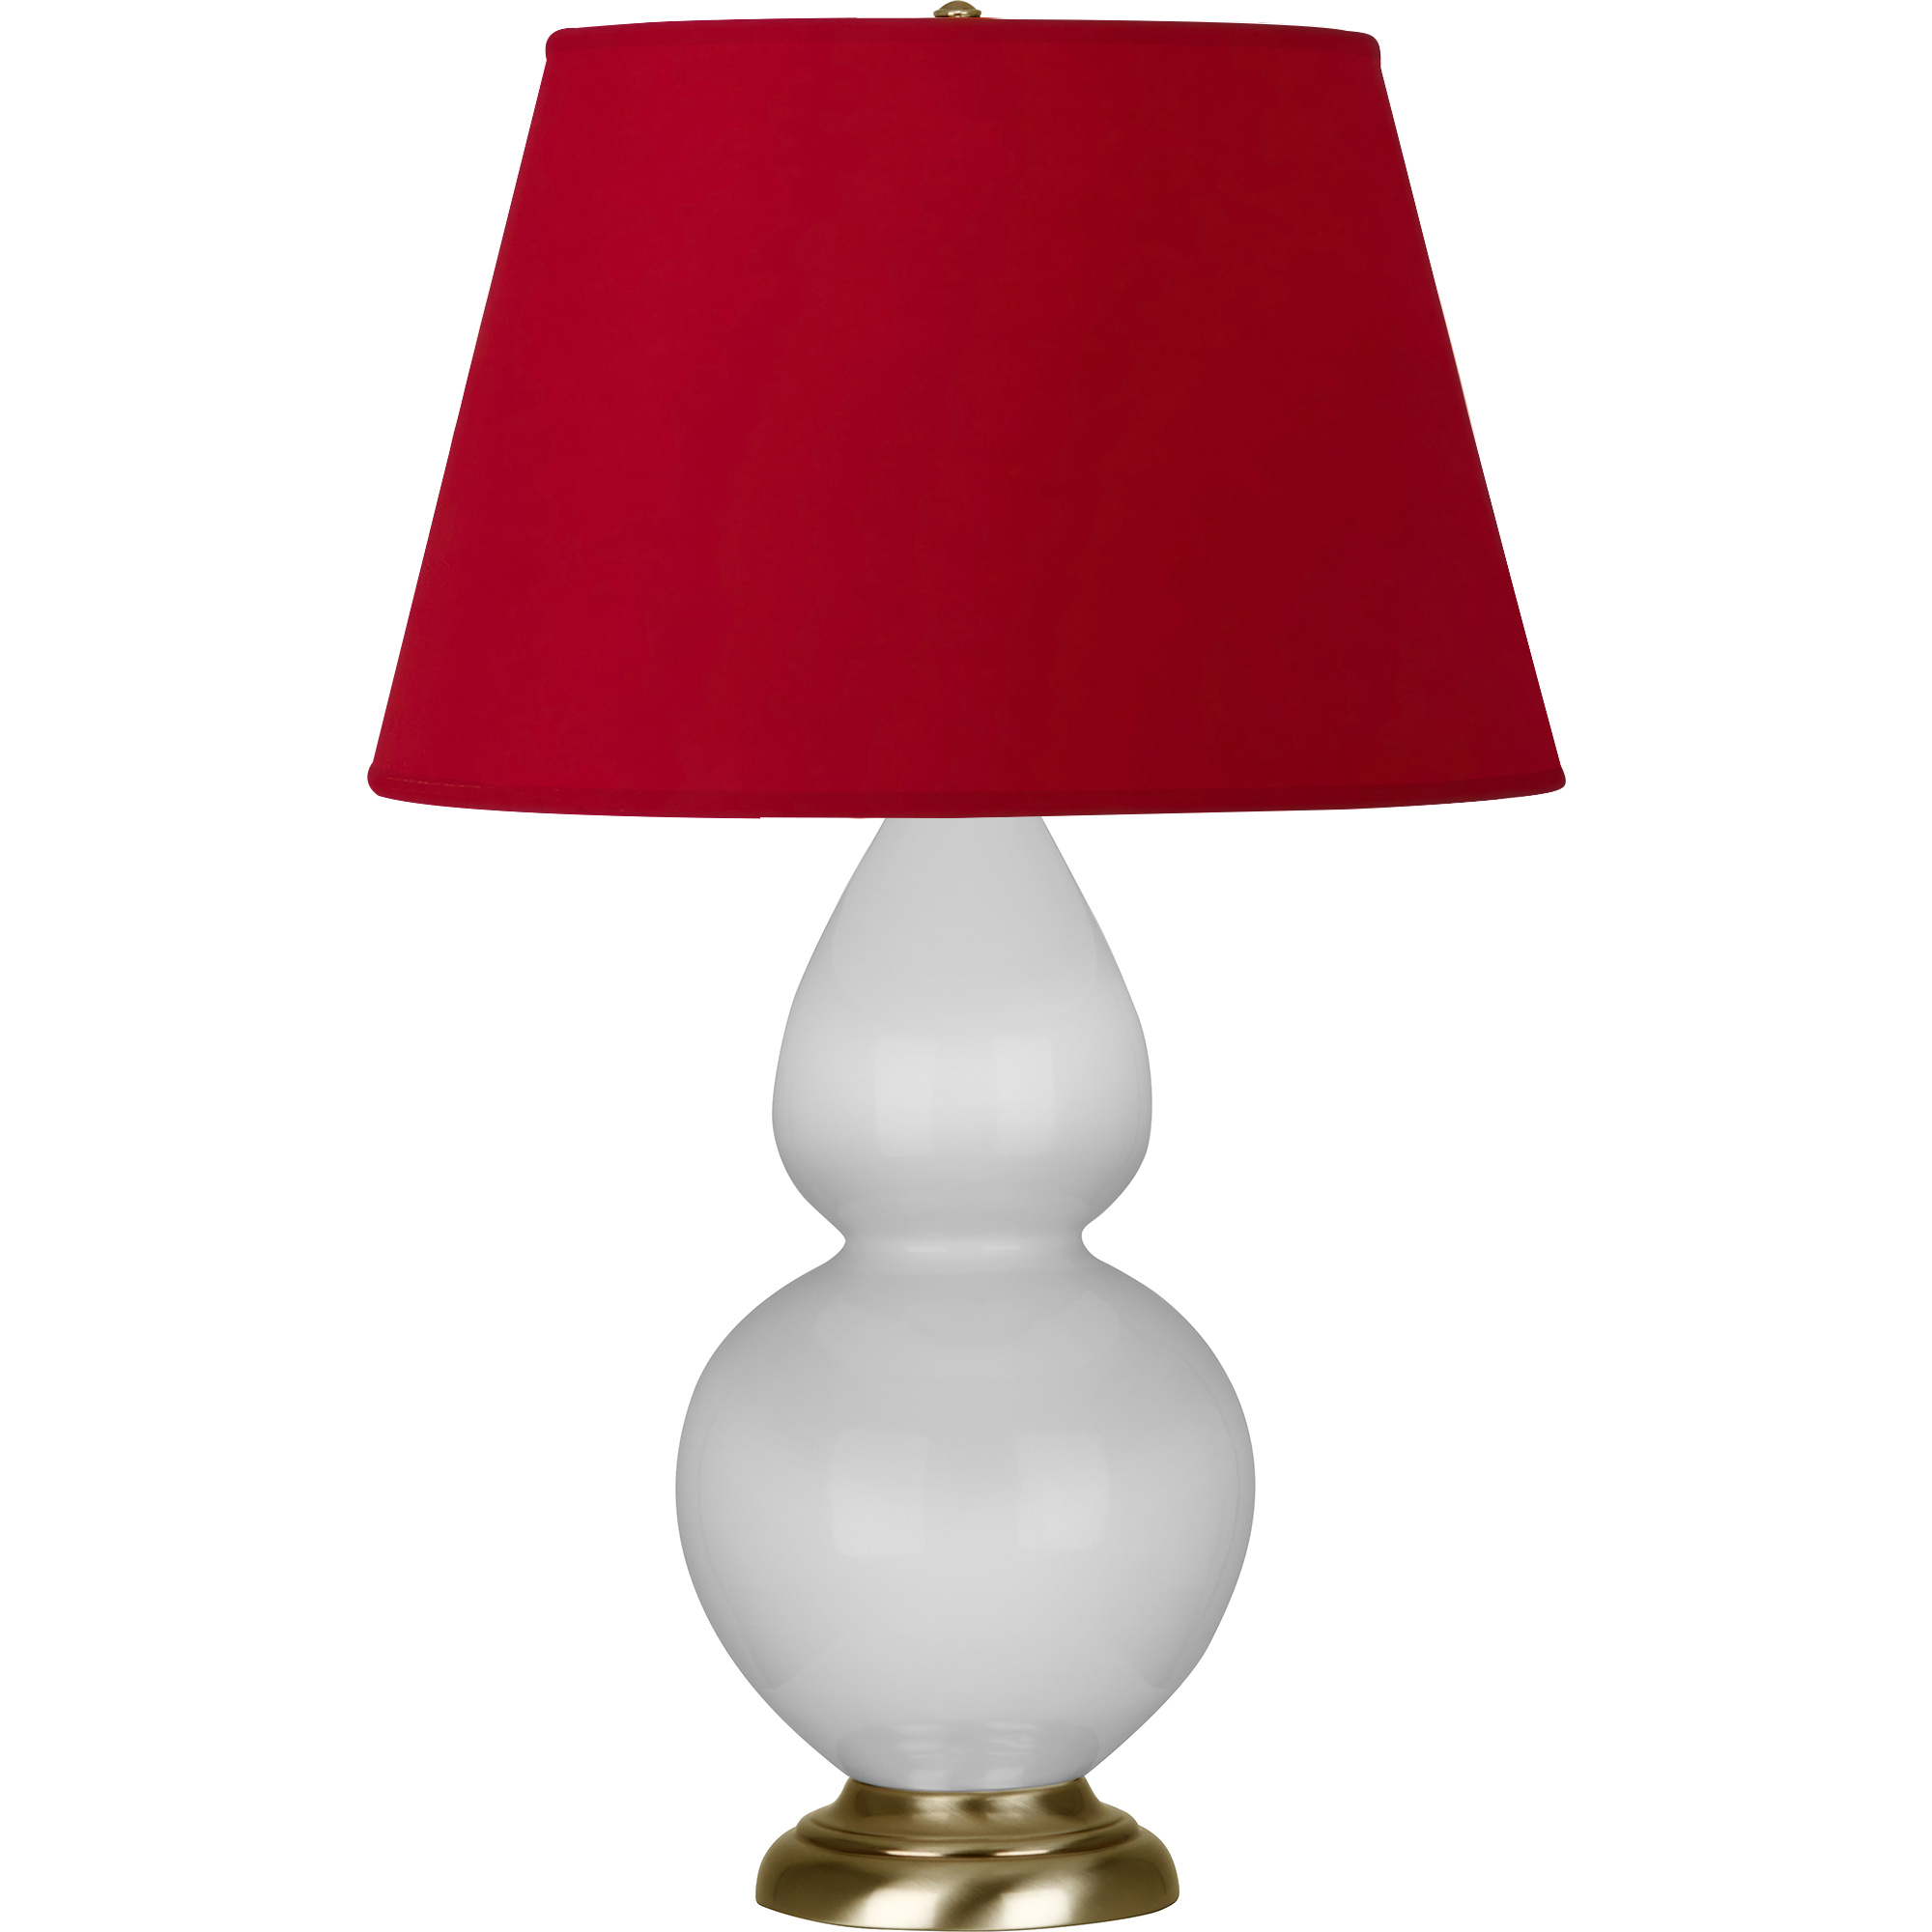 Double Gourd Table Lamp Style #DY20R